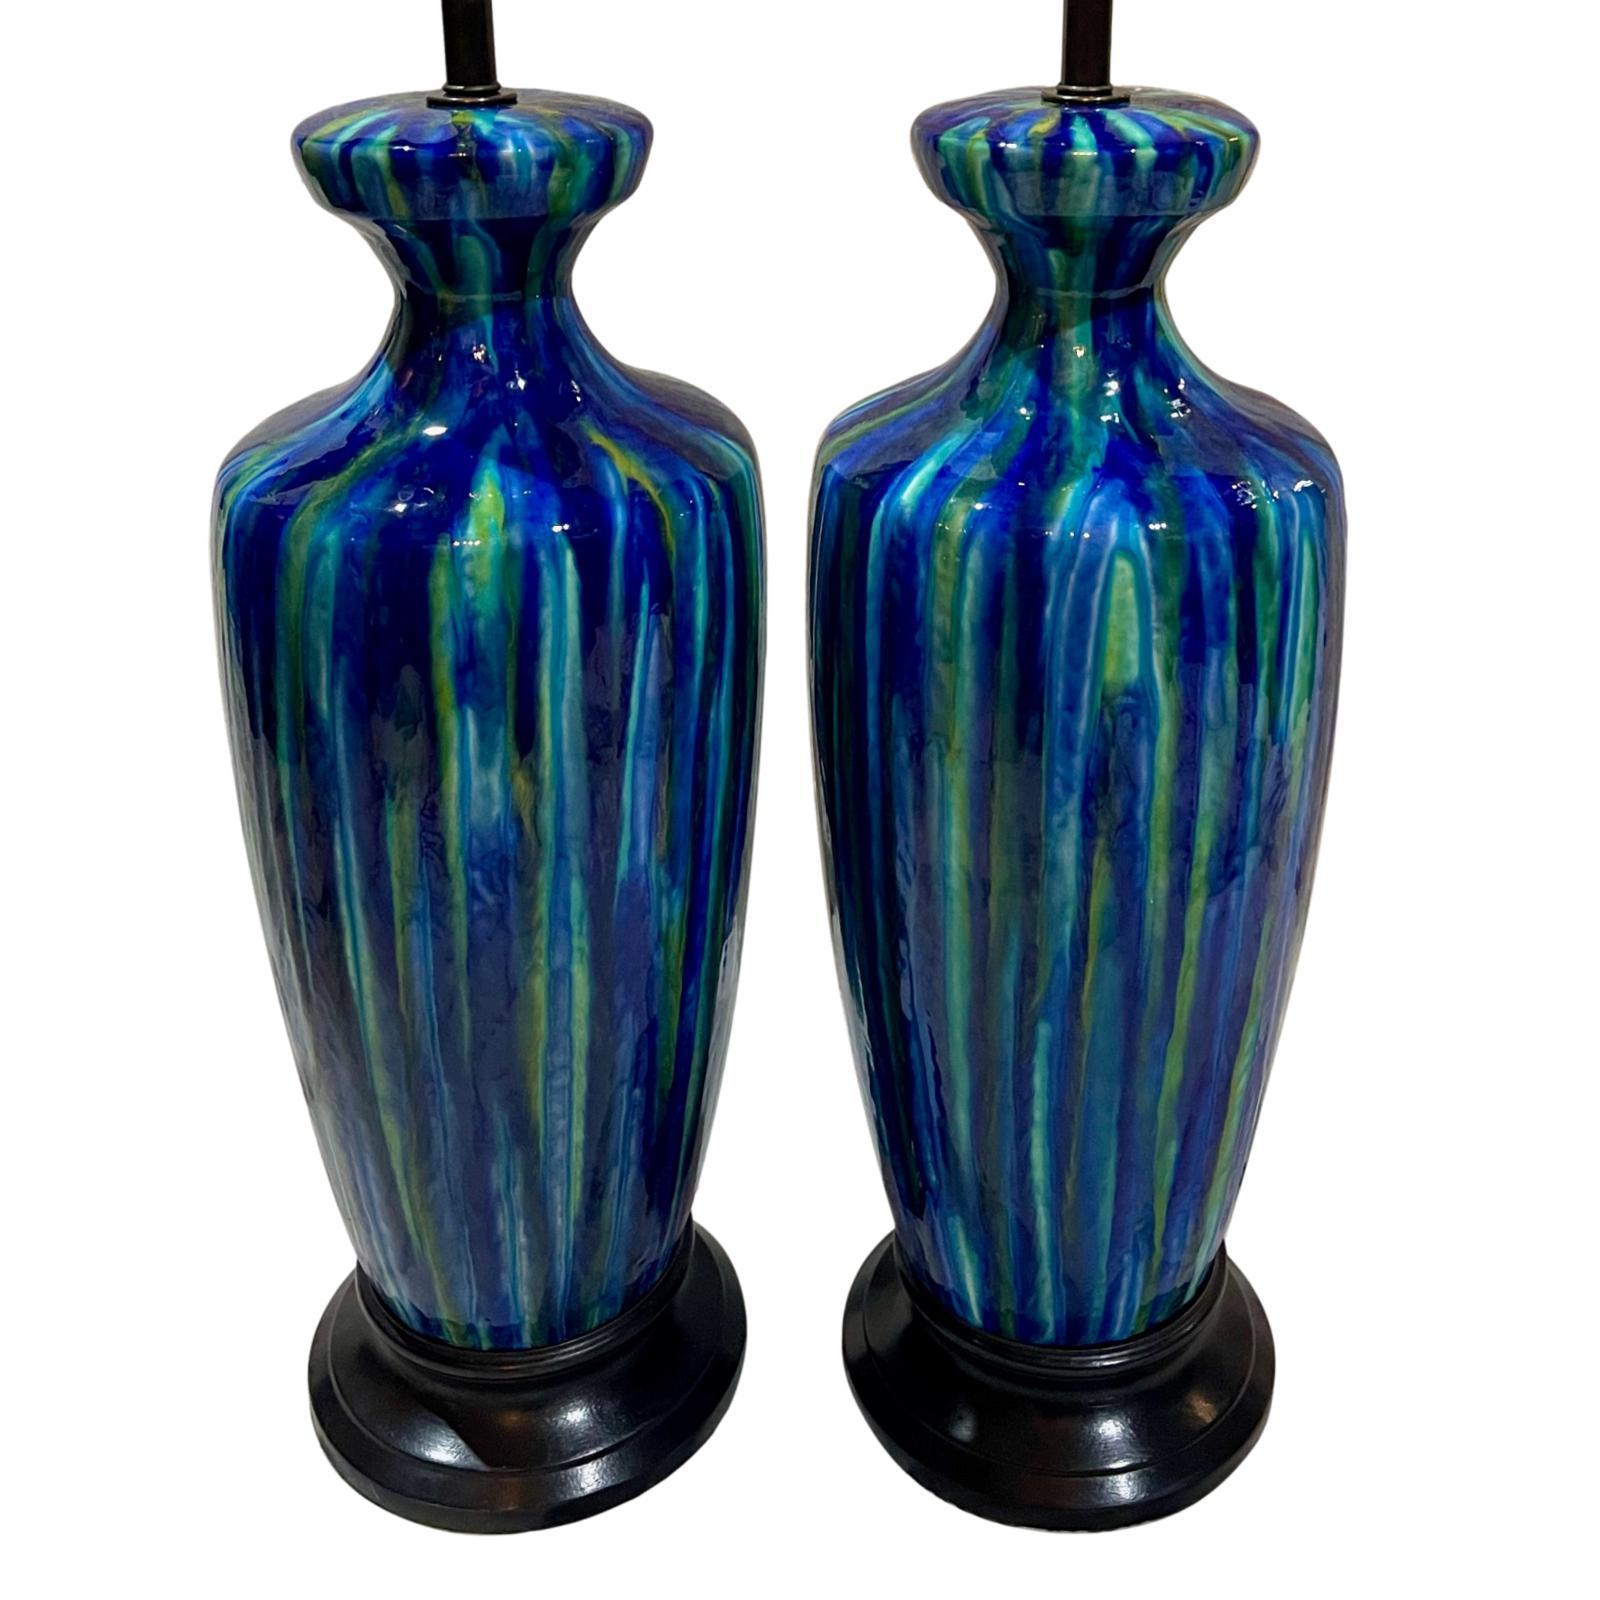 A pair of large Italian circa 1950s blue porcelain table lamps with ebonized bases.

Measurements:
Height of body 24